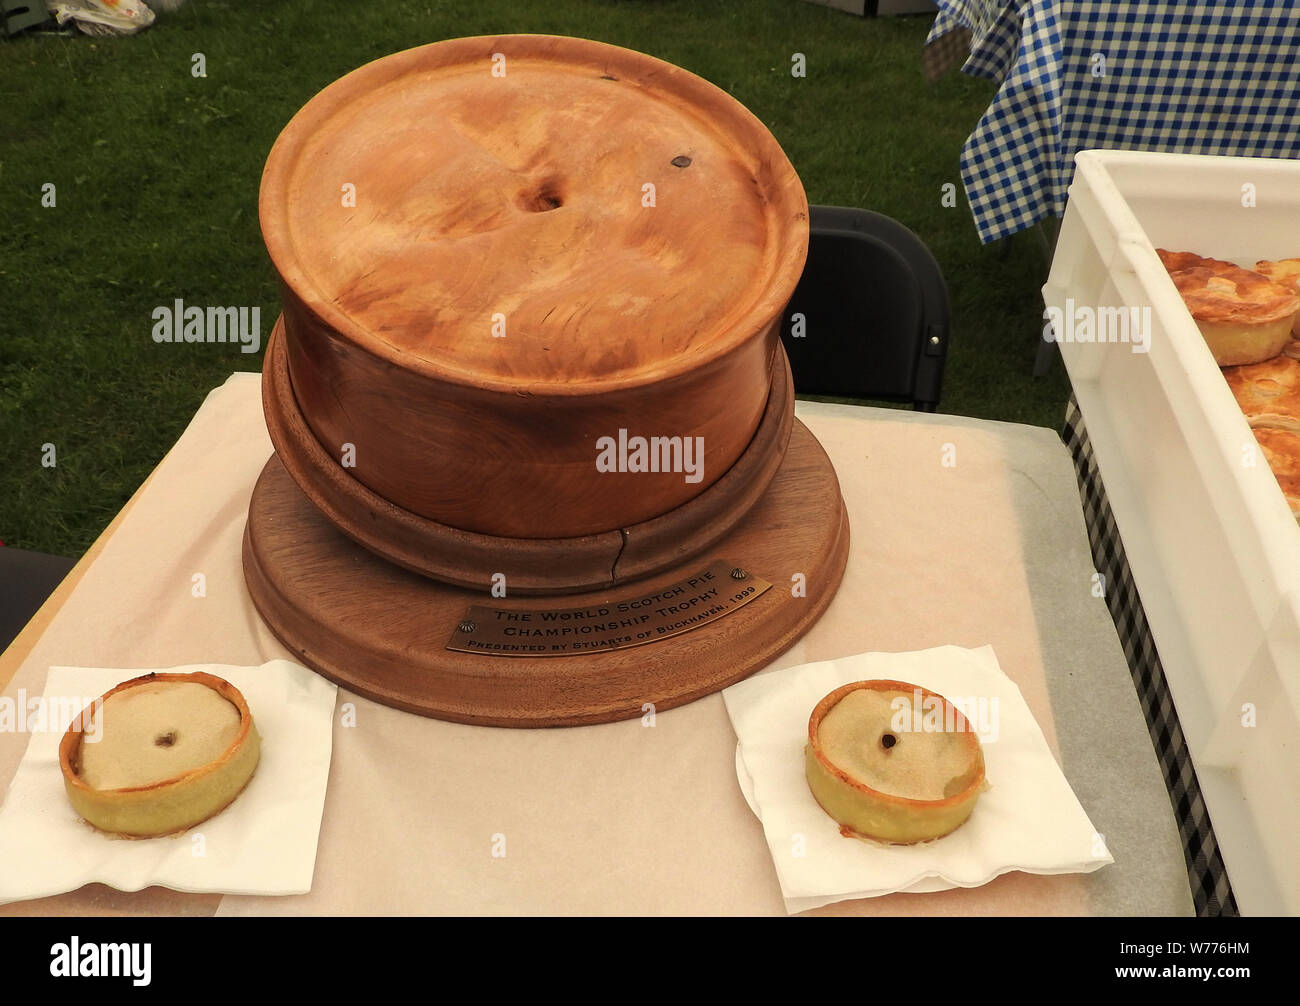 Annual World Scotch Pie championship Award Trophy with actual Scotch pies. (Also known in some areas as a mince, shell,peppery or football pie.) Exhibited at the Stranraer annual agricultural show 2019 Stock Photo